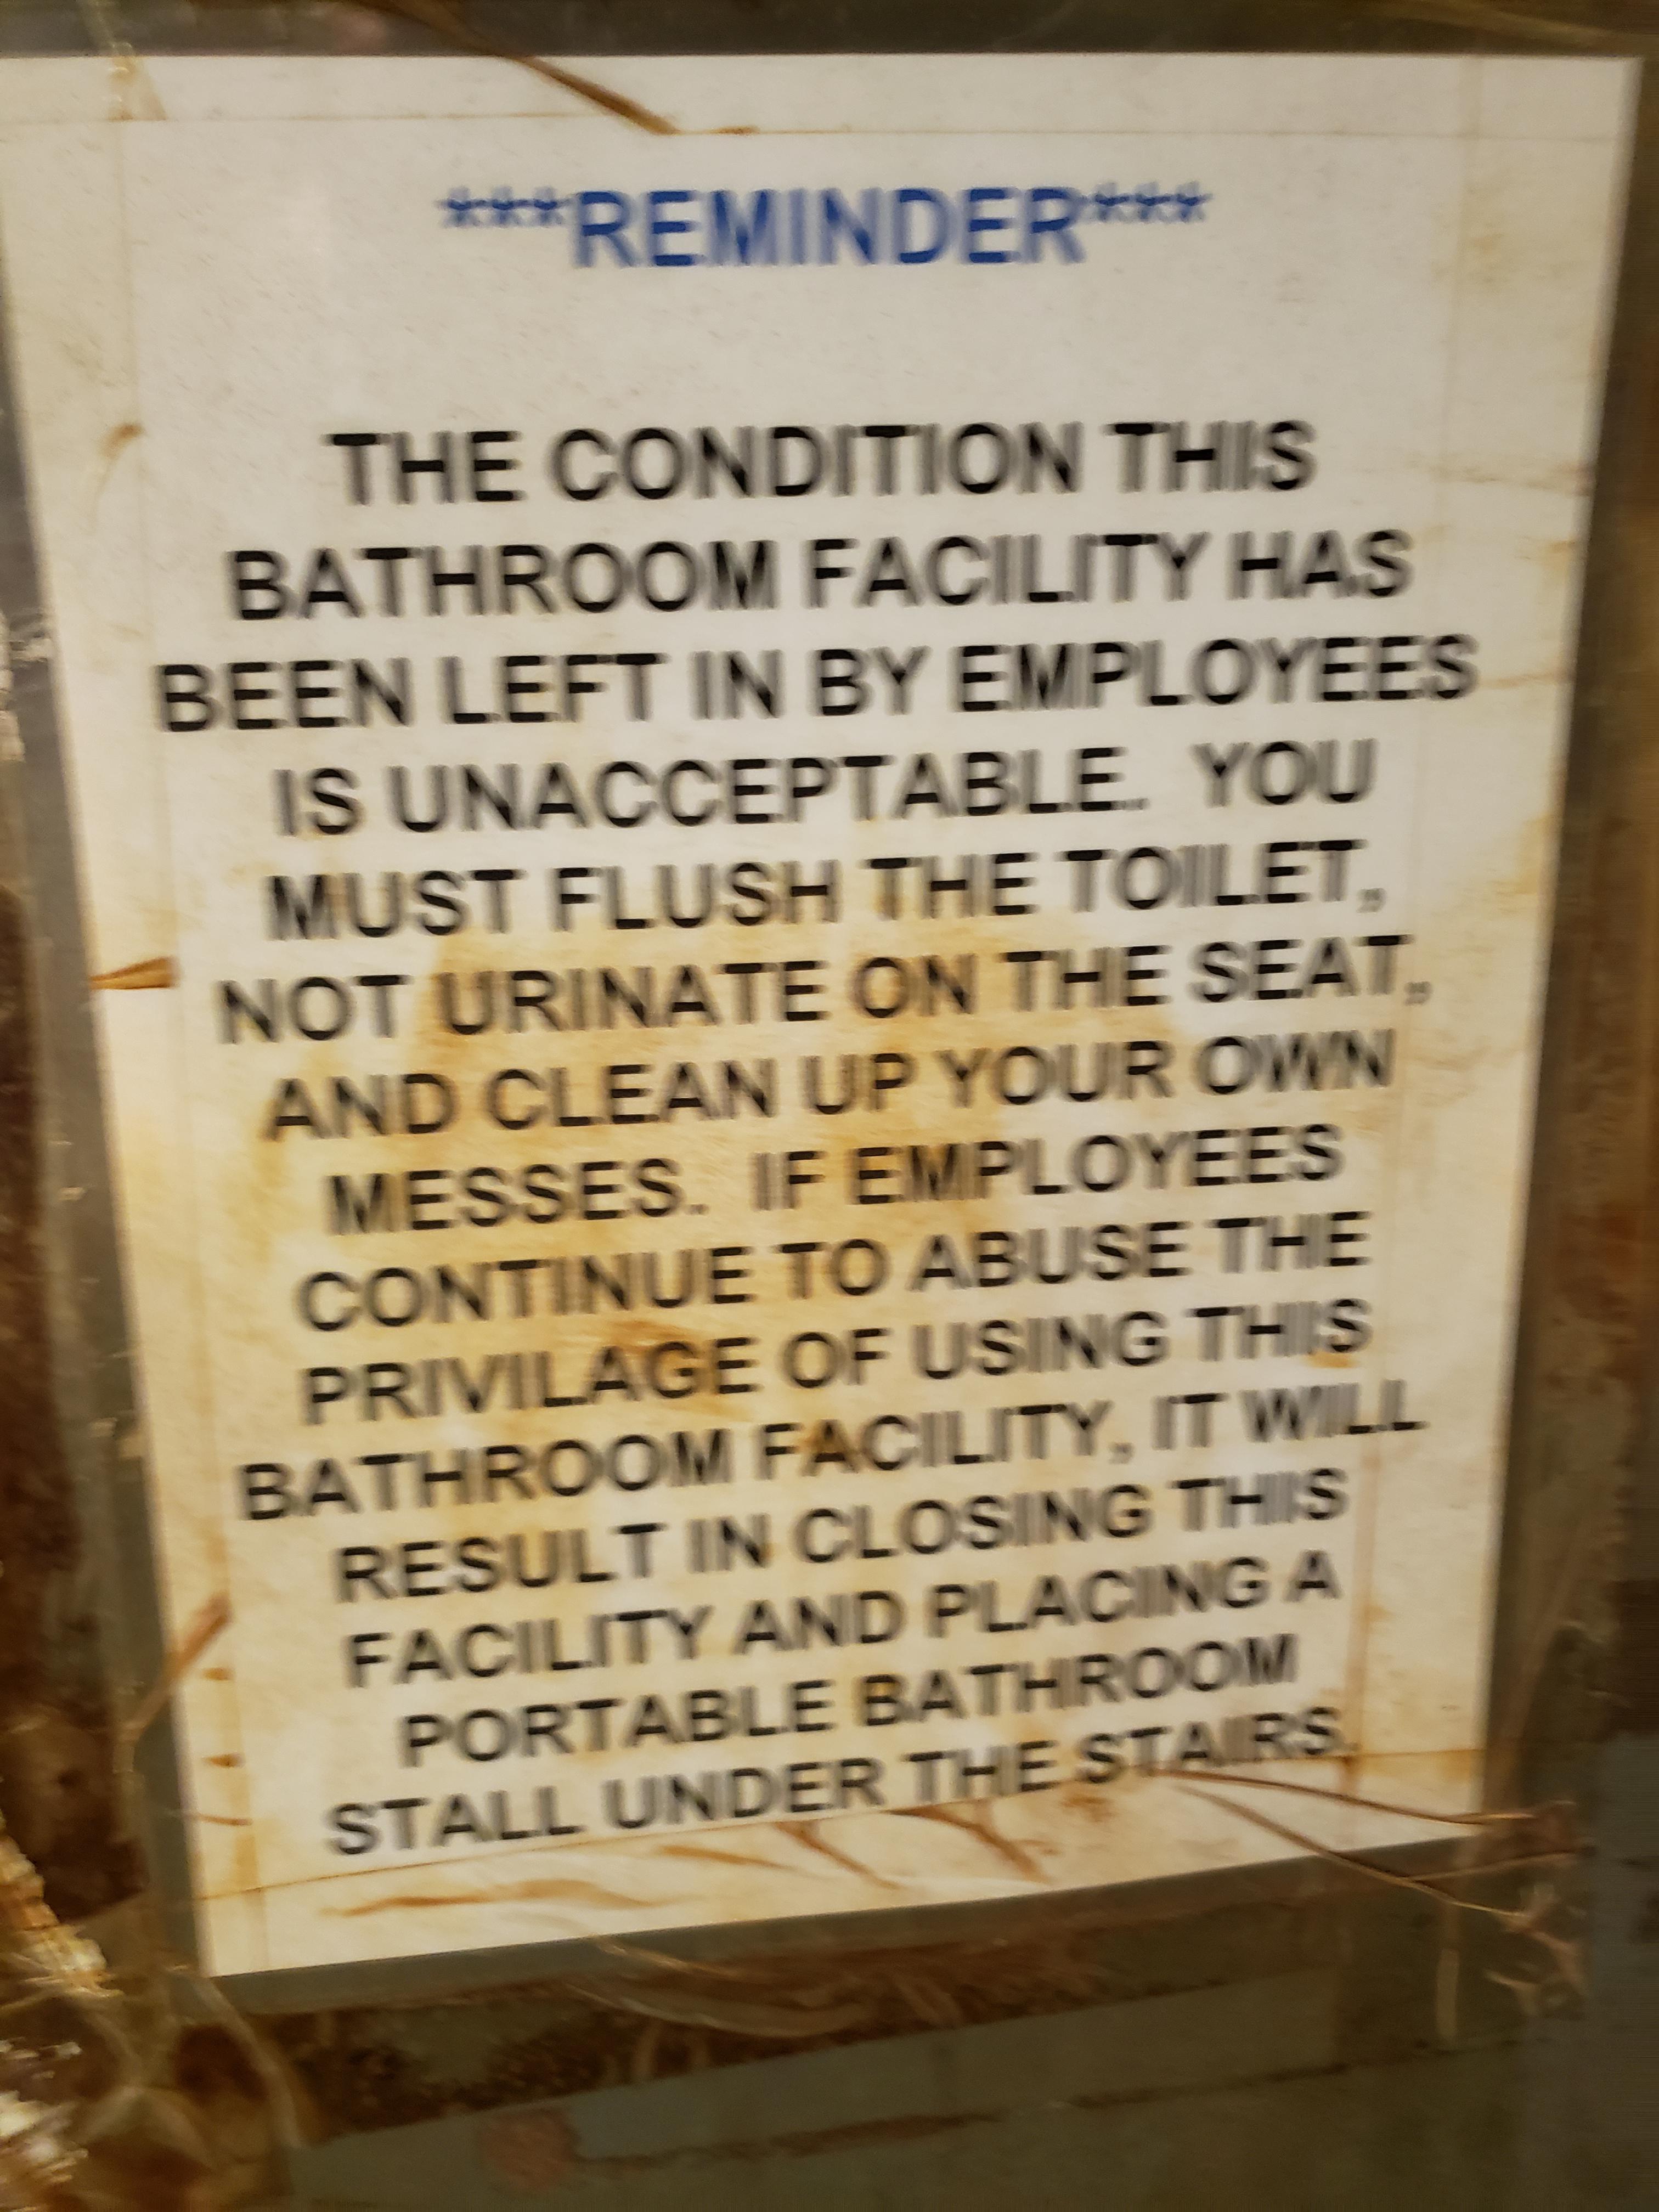 Reminder The Condition This Bathroom Facility Has Been Left In By Employees Is Unacceptable You Must Flush The Toilet, Not Urinate On The Seat, And Clean Up Your Own Messes. If Employees Continue To Abuse The Privilage Of Using This Bathroom Facility, It…